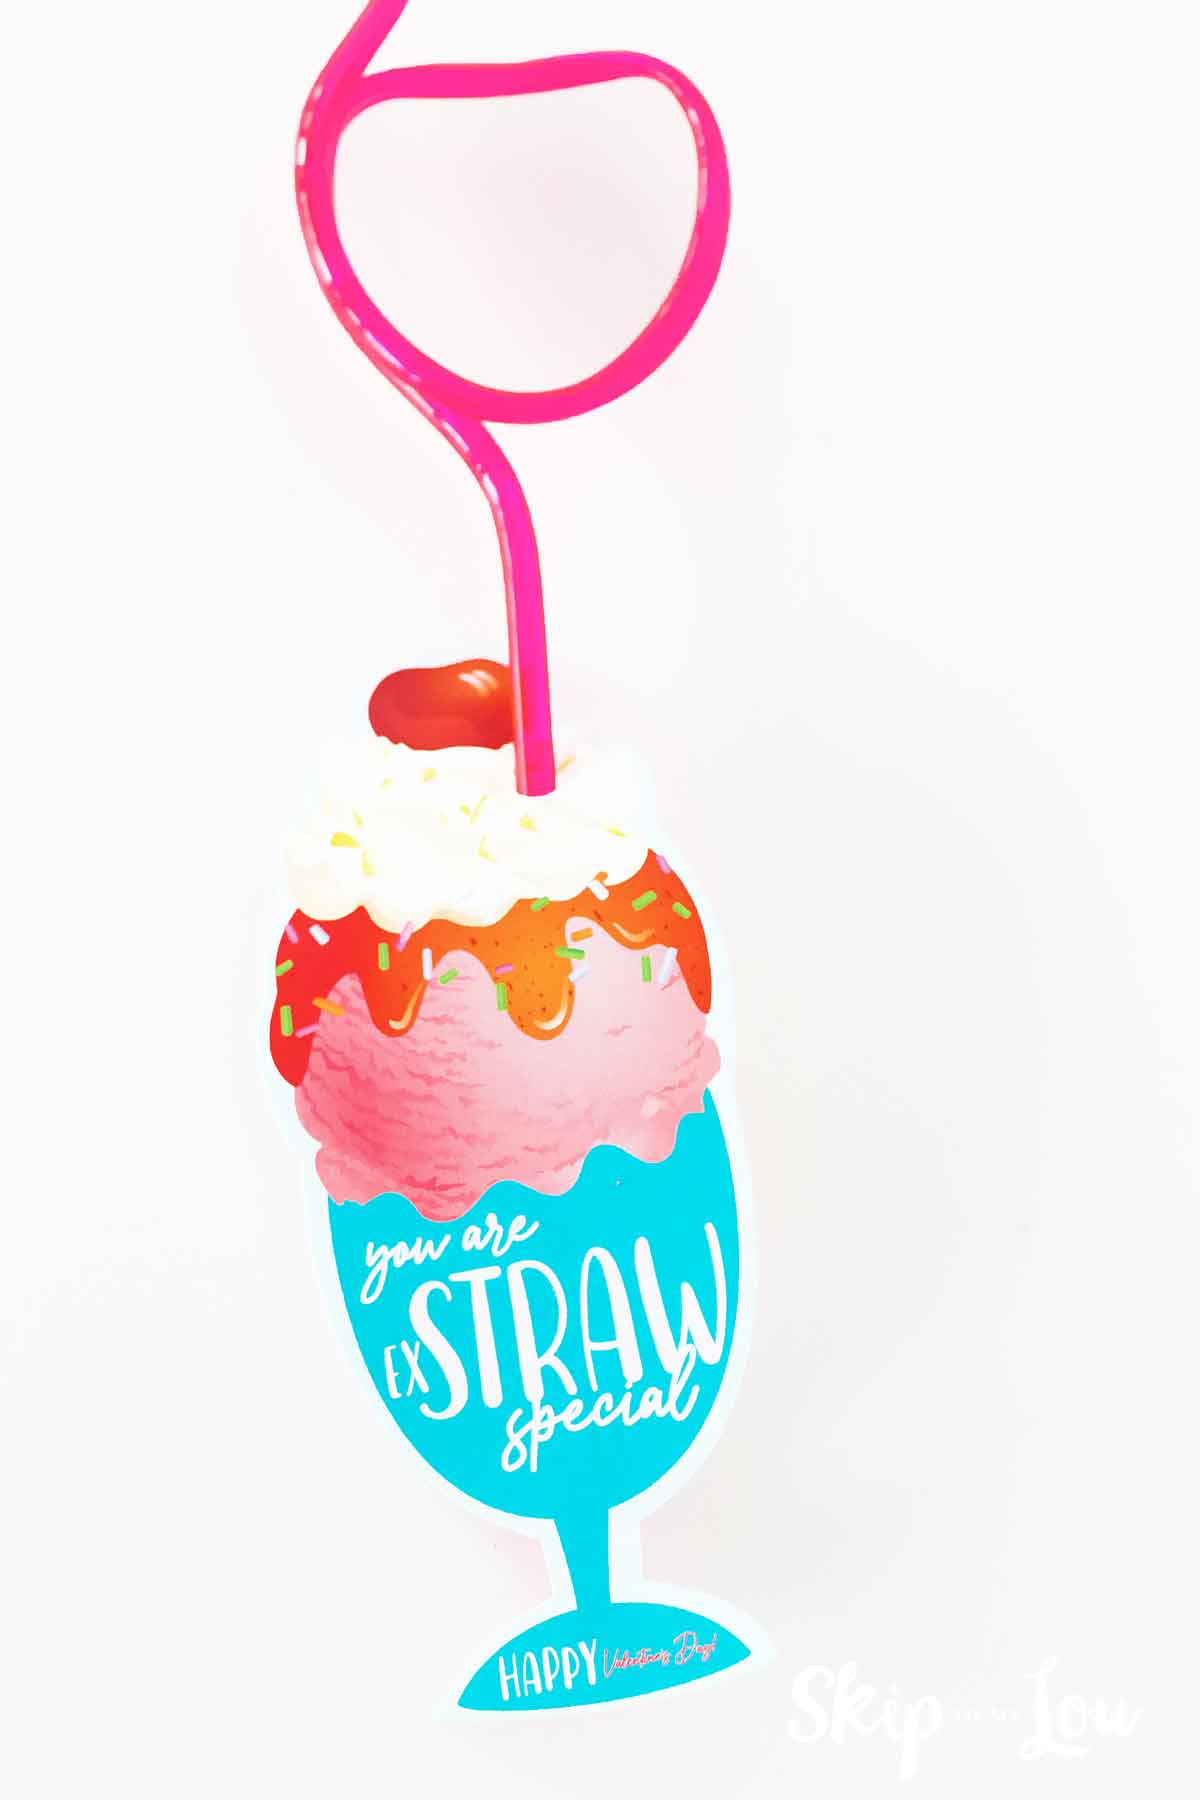 printable sundae with a crazy heart straw and it says you're extra speical